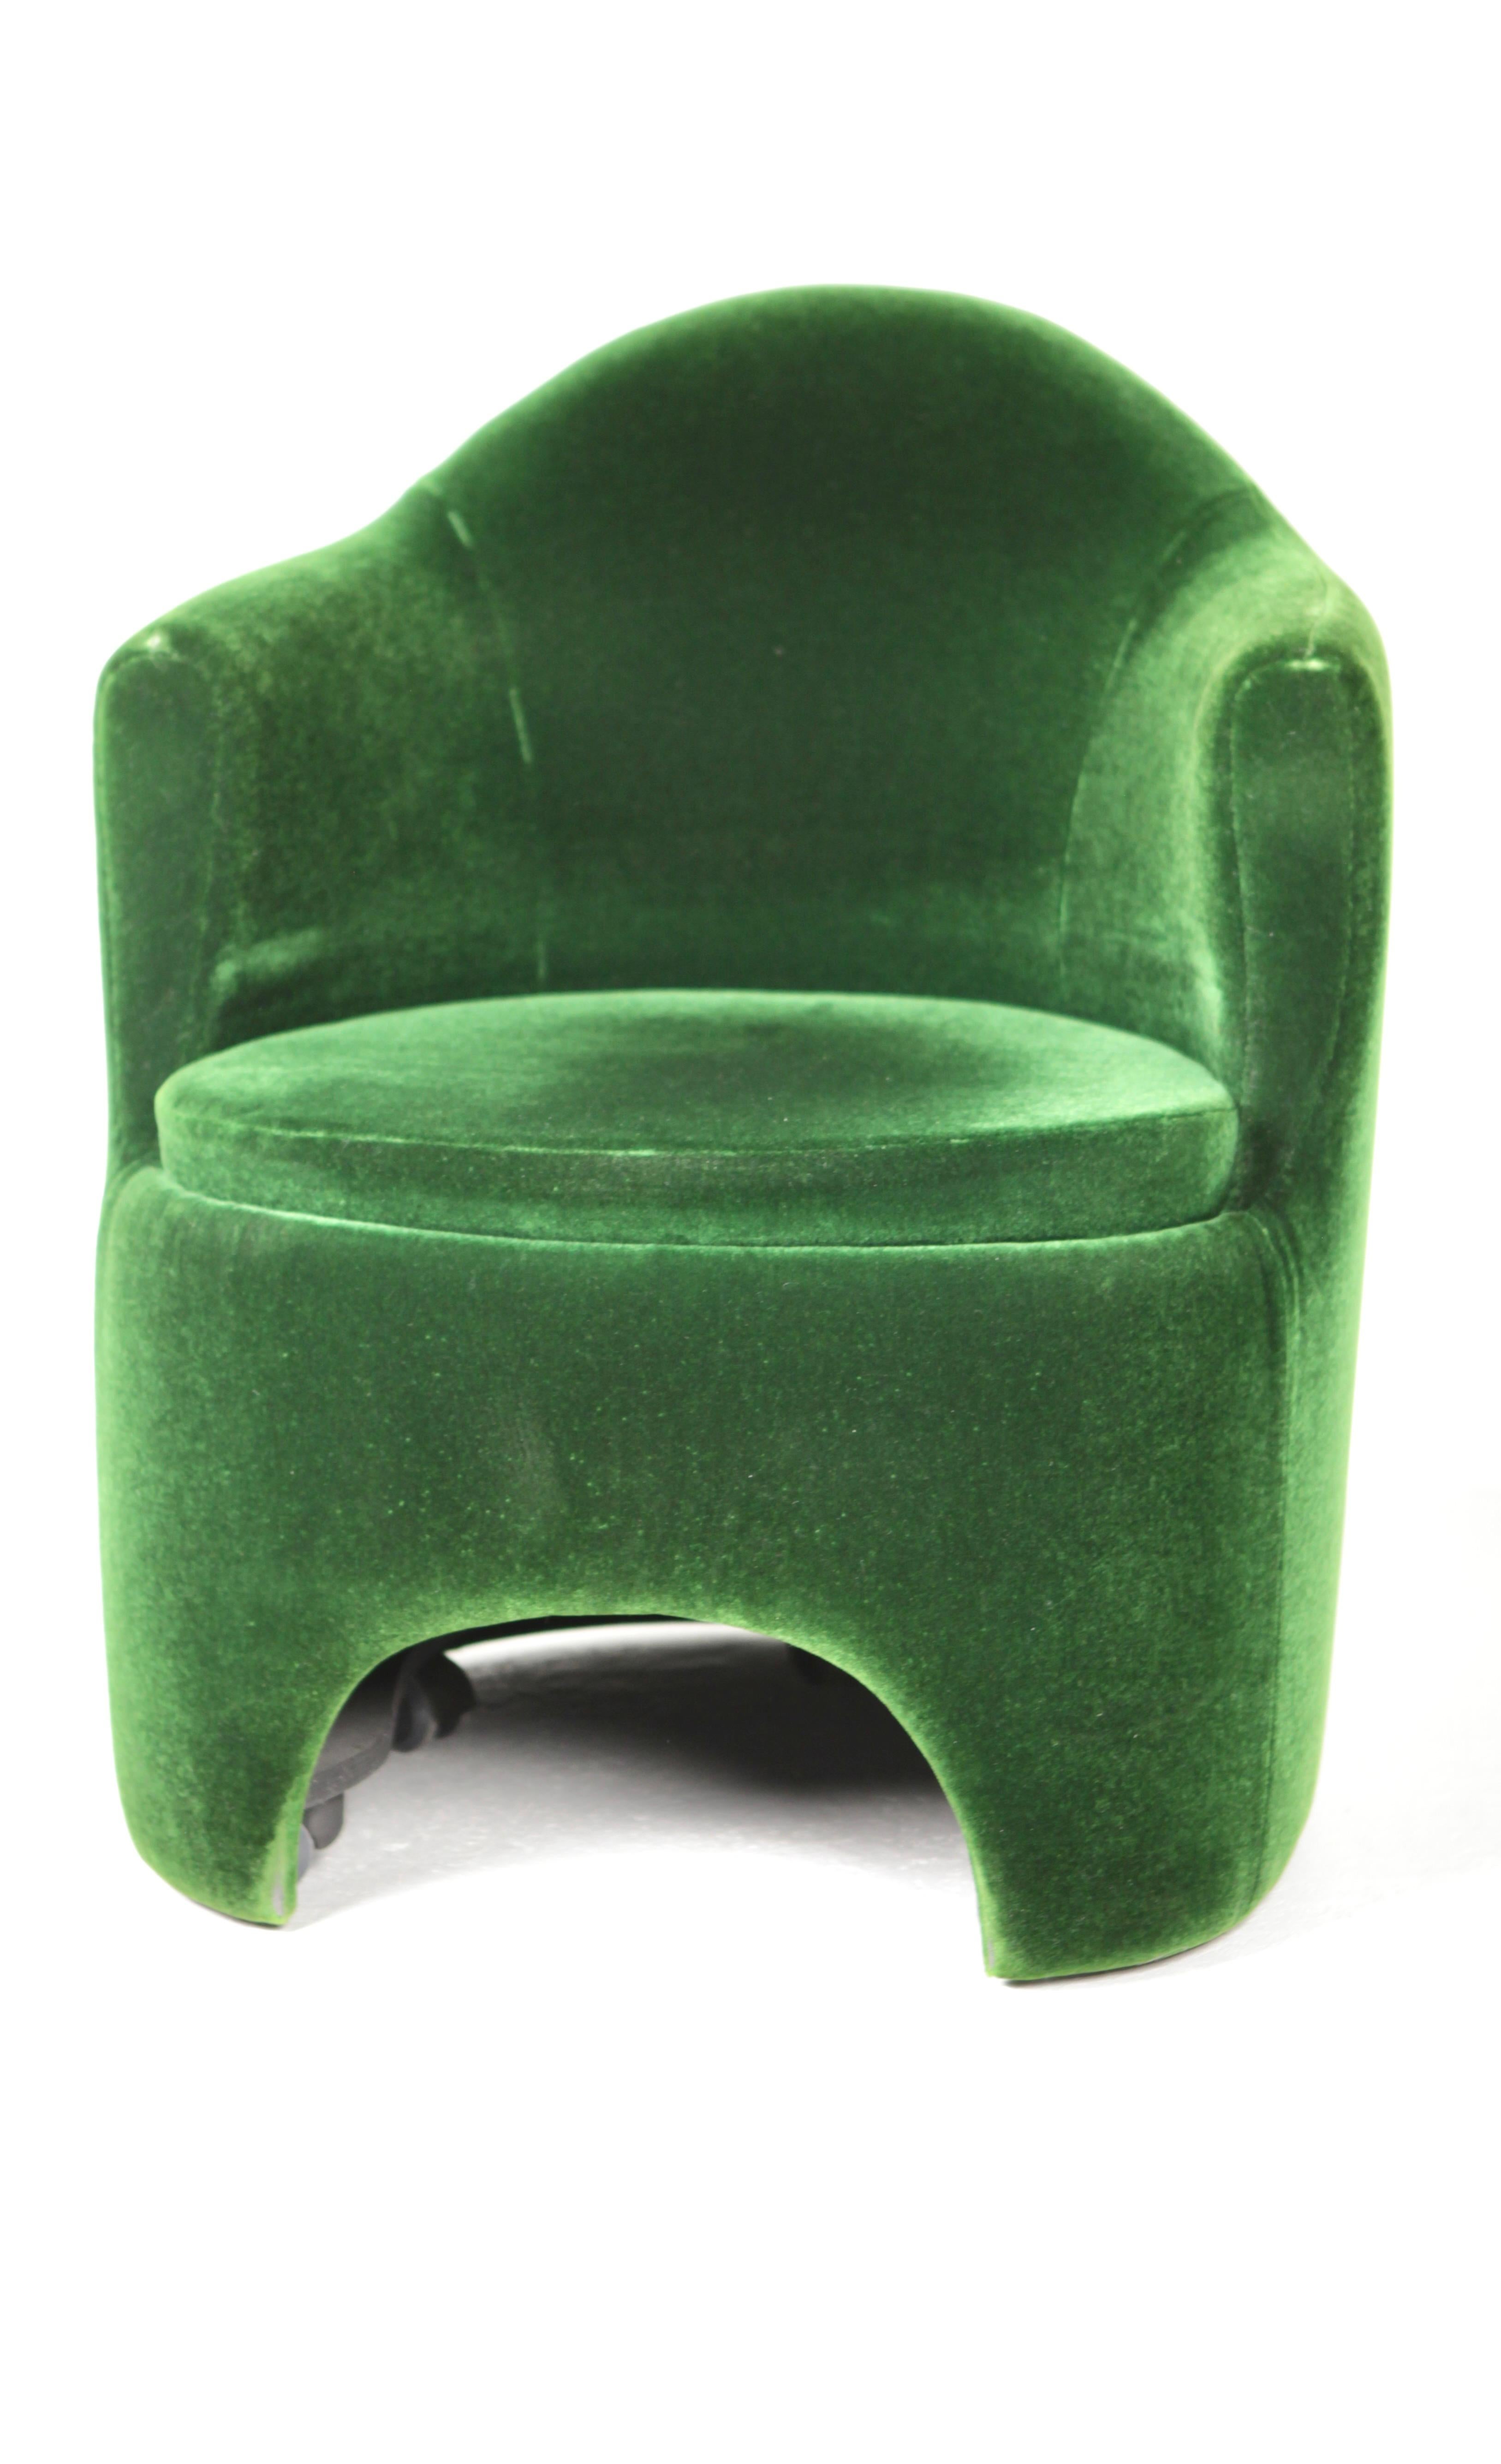 A rare sliding studio chair designed by Luigi Caccia Dominioni for Azucena.
Upholsterd in Dark Green Mohair.
Very nice vintage condition.